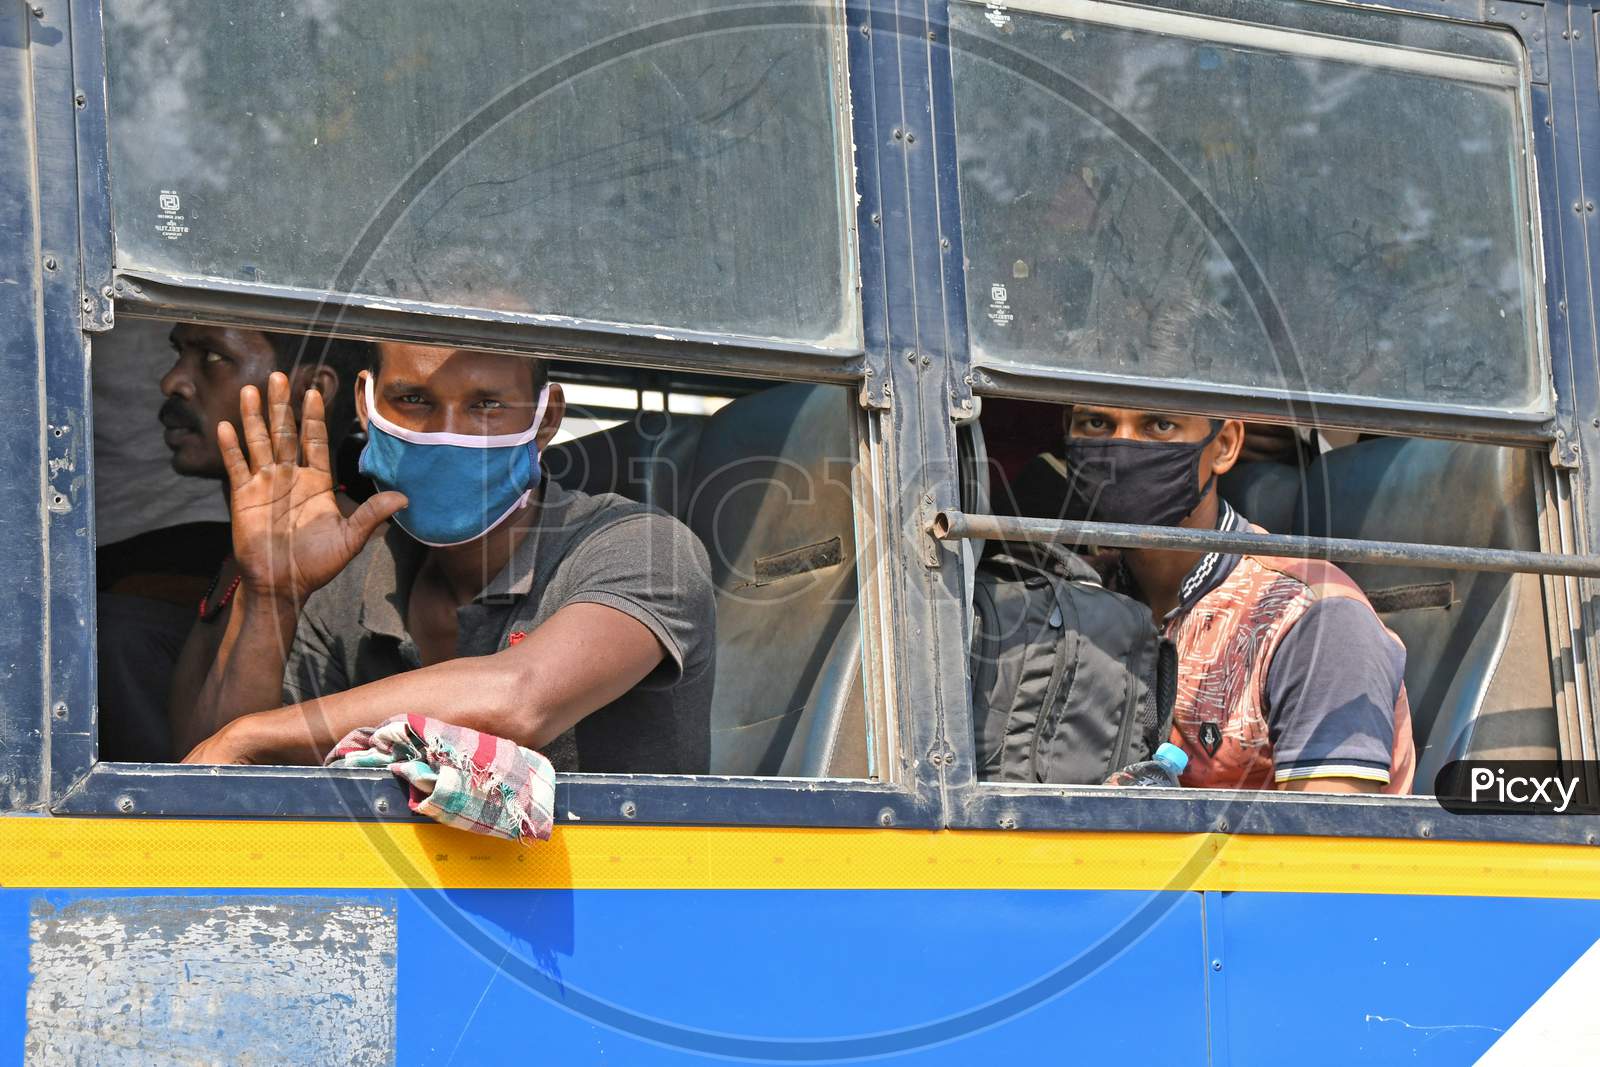 Migrant workers stranded due to lockdown in the emergence of Novel Coronavirus (COVID-19) have returned to their home state (West Bengal) on a 'Shramik Special' train from other states